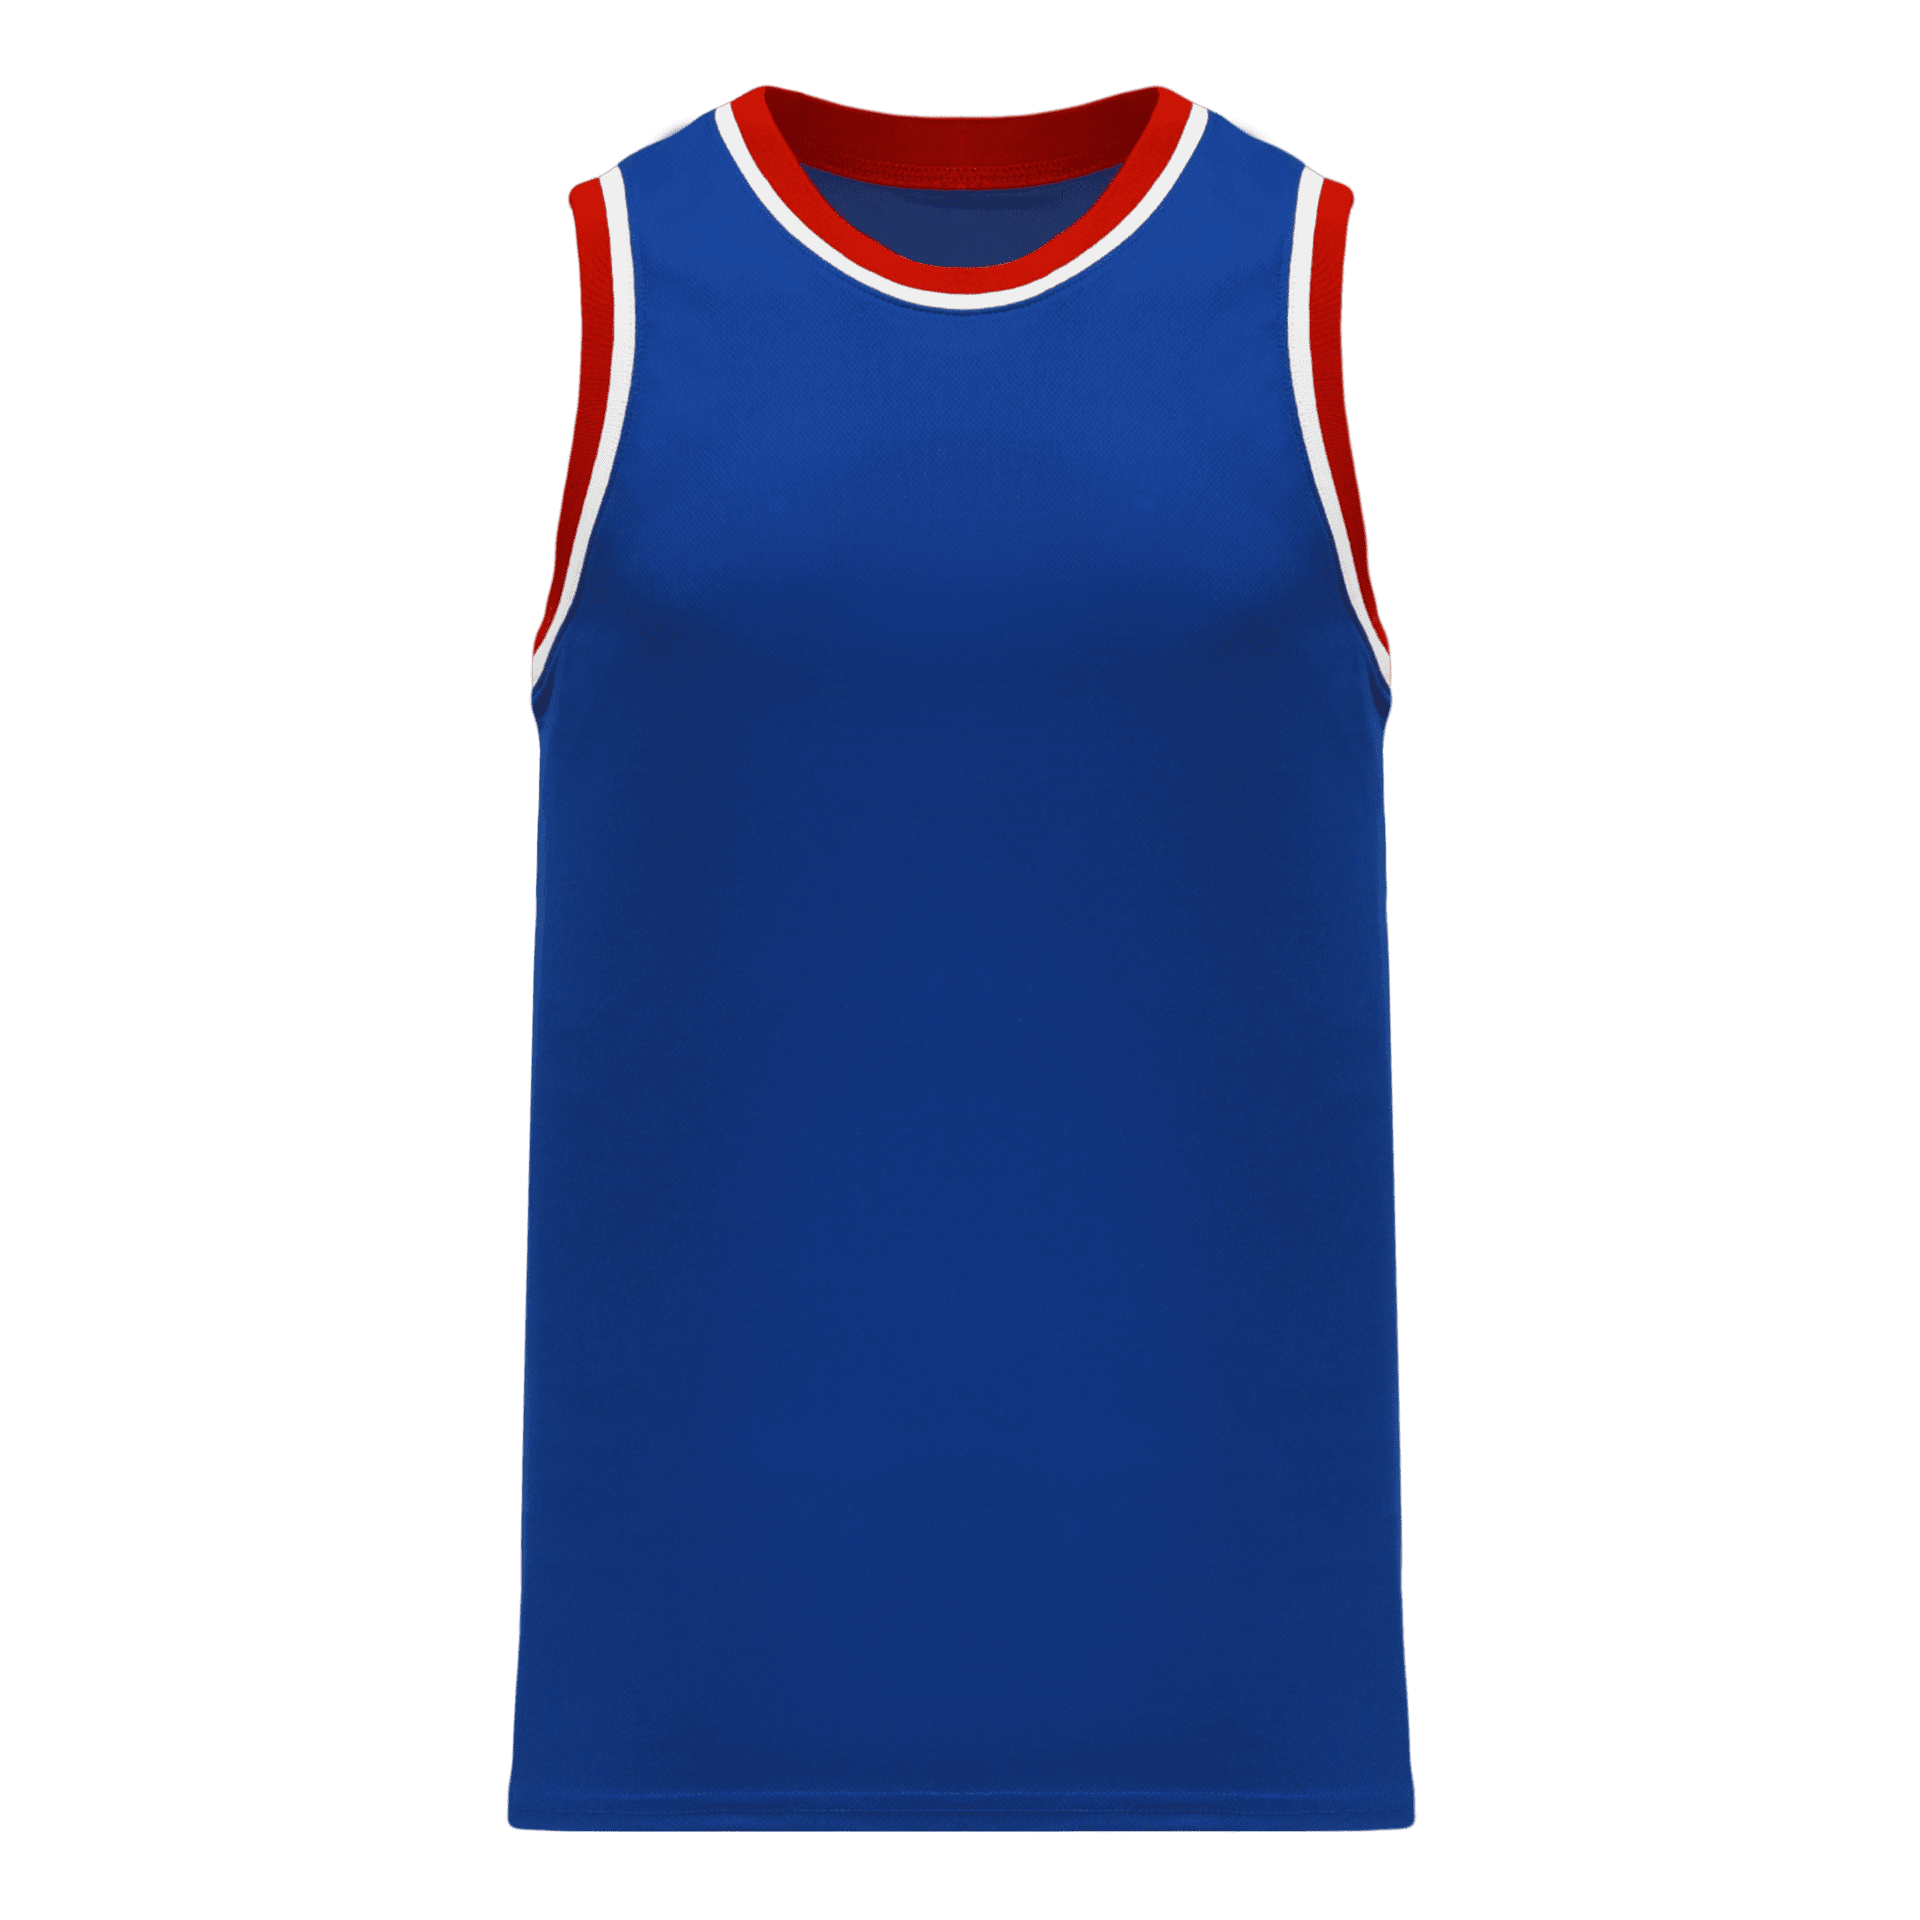 ATHLETIC KNIT PRO BASKETBALL JERSEY #B1710 Royal / Red / White